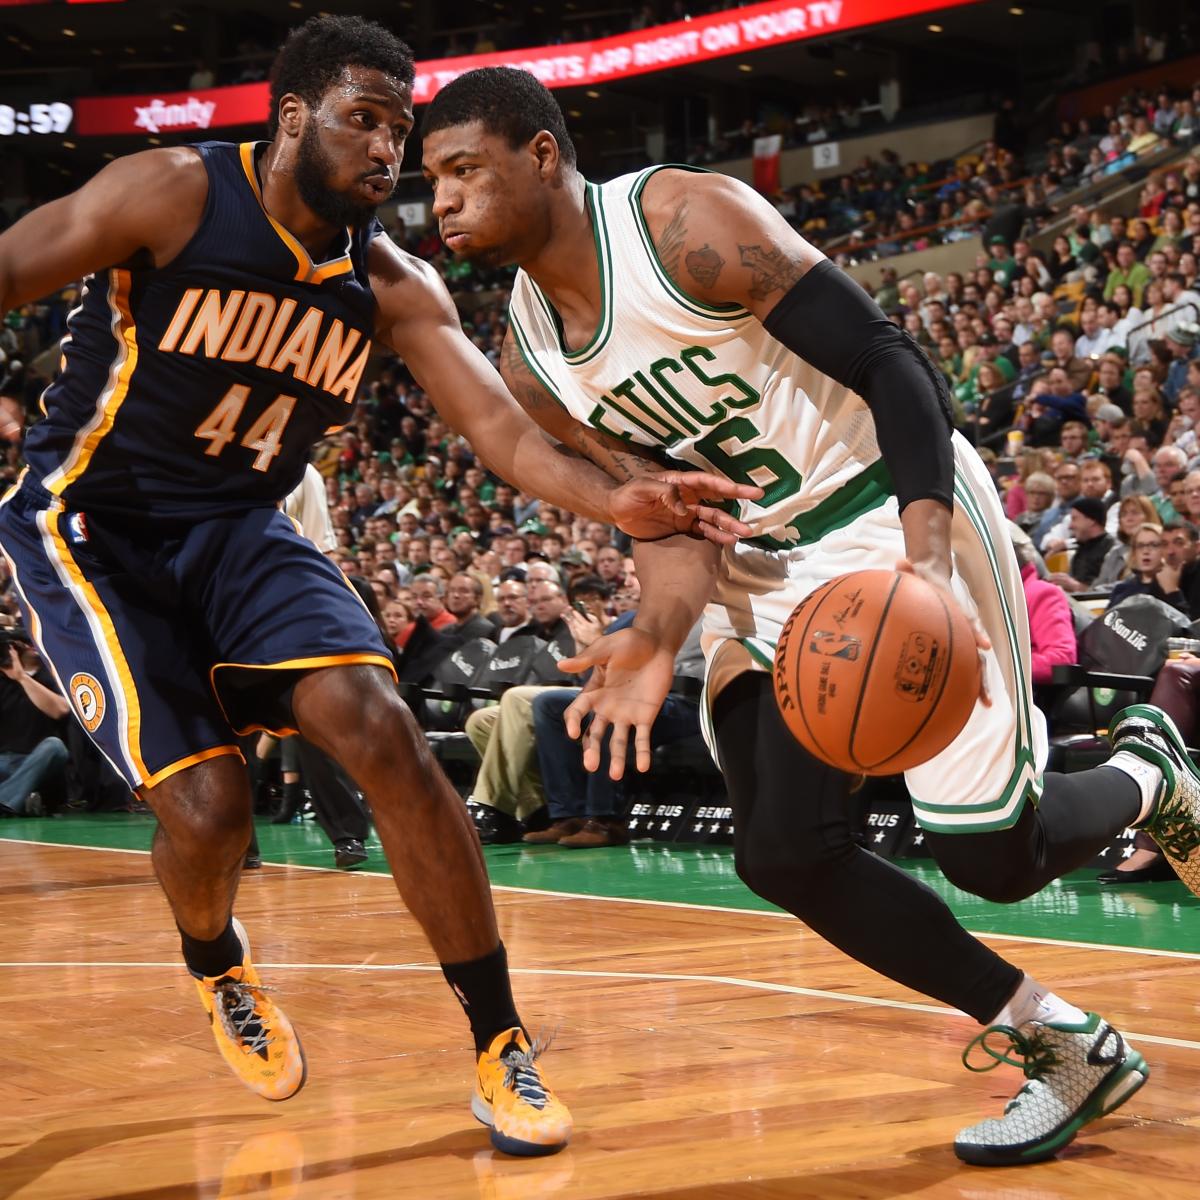 Indiana Pacers vs. Boston Celtics 11/7/14 Video Highlights and Recap